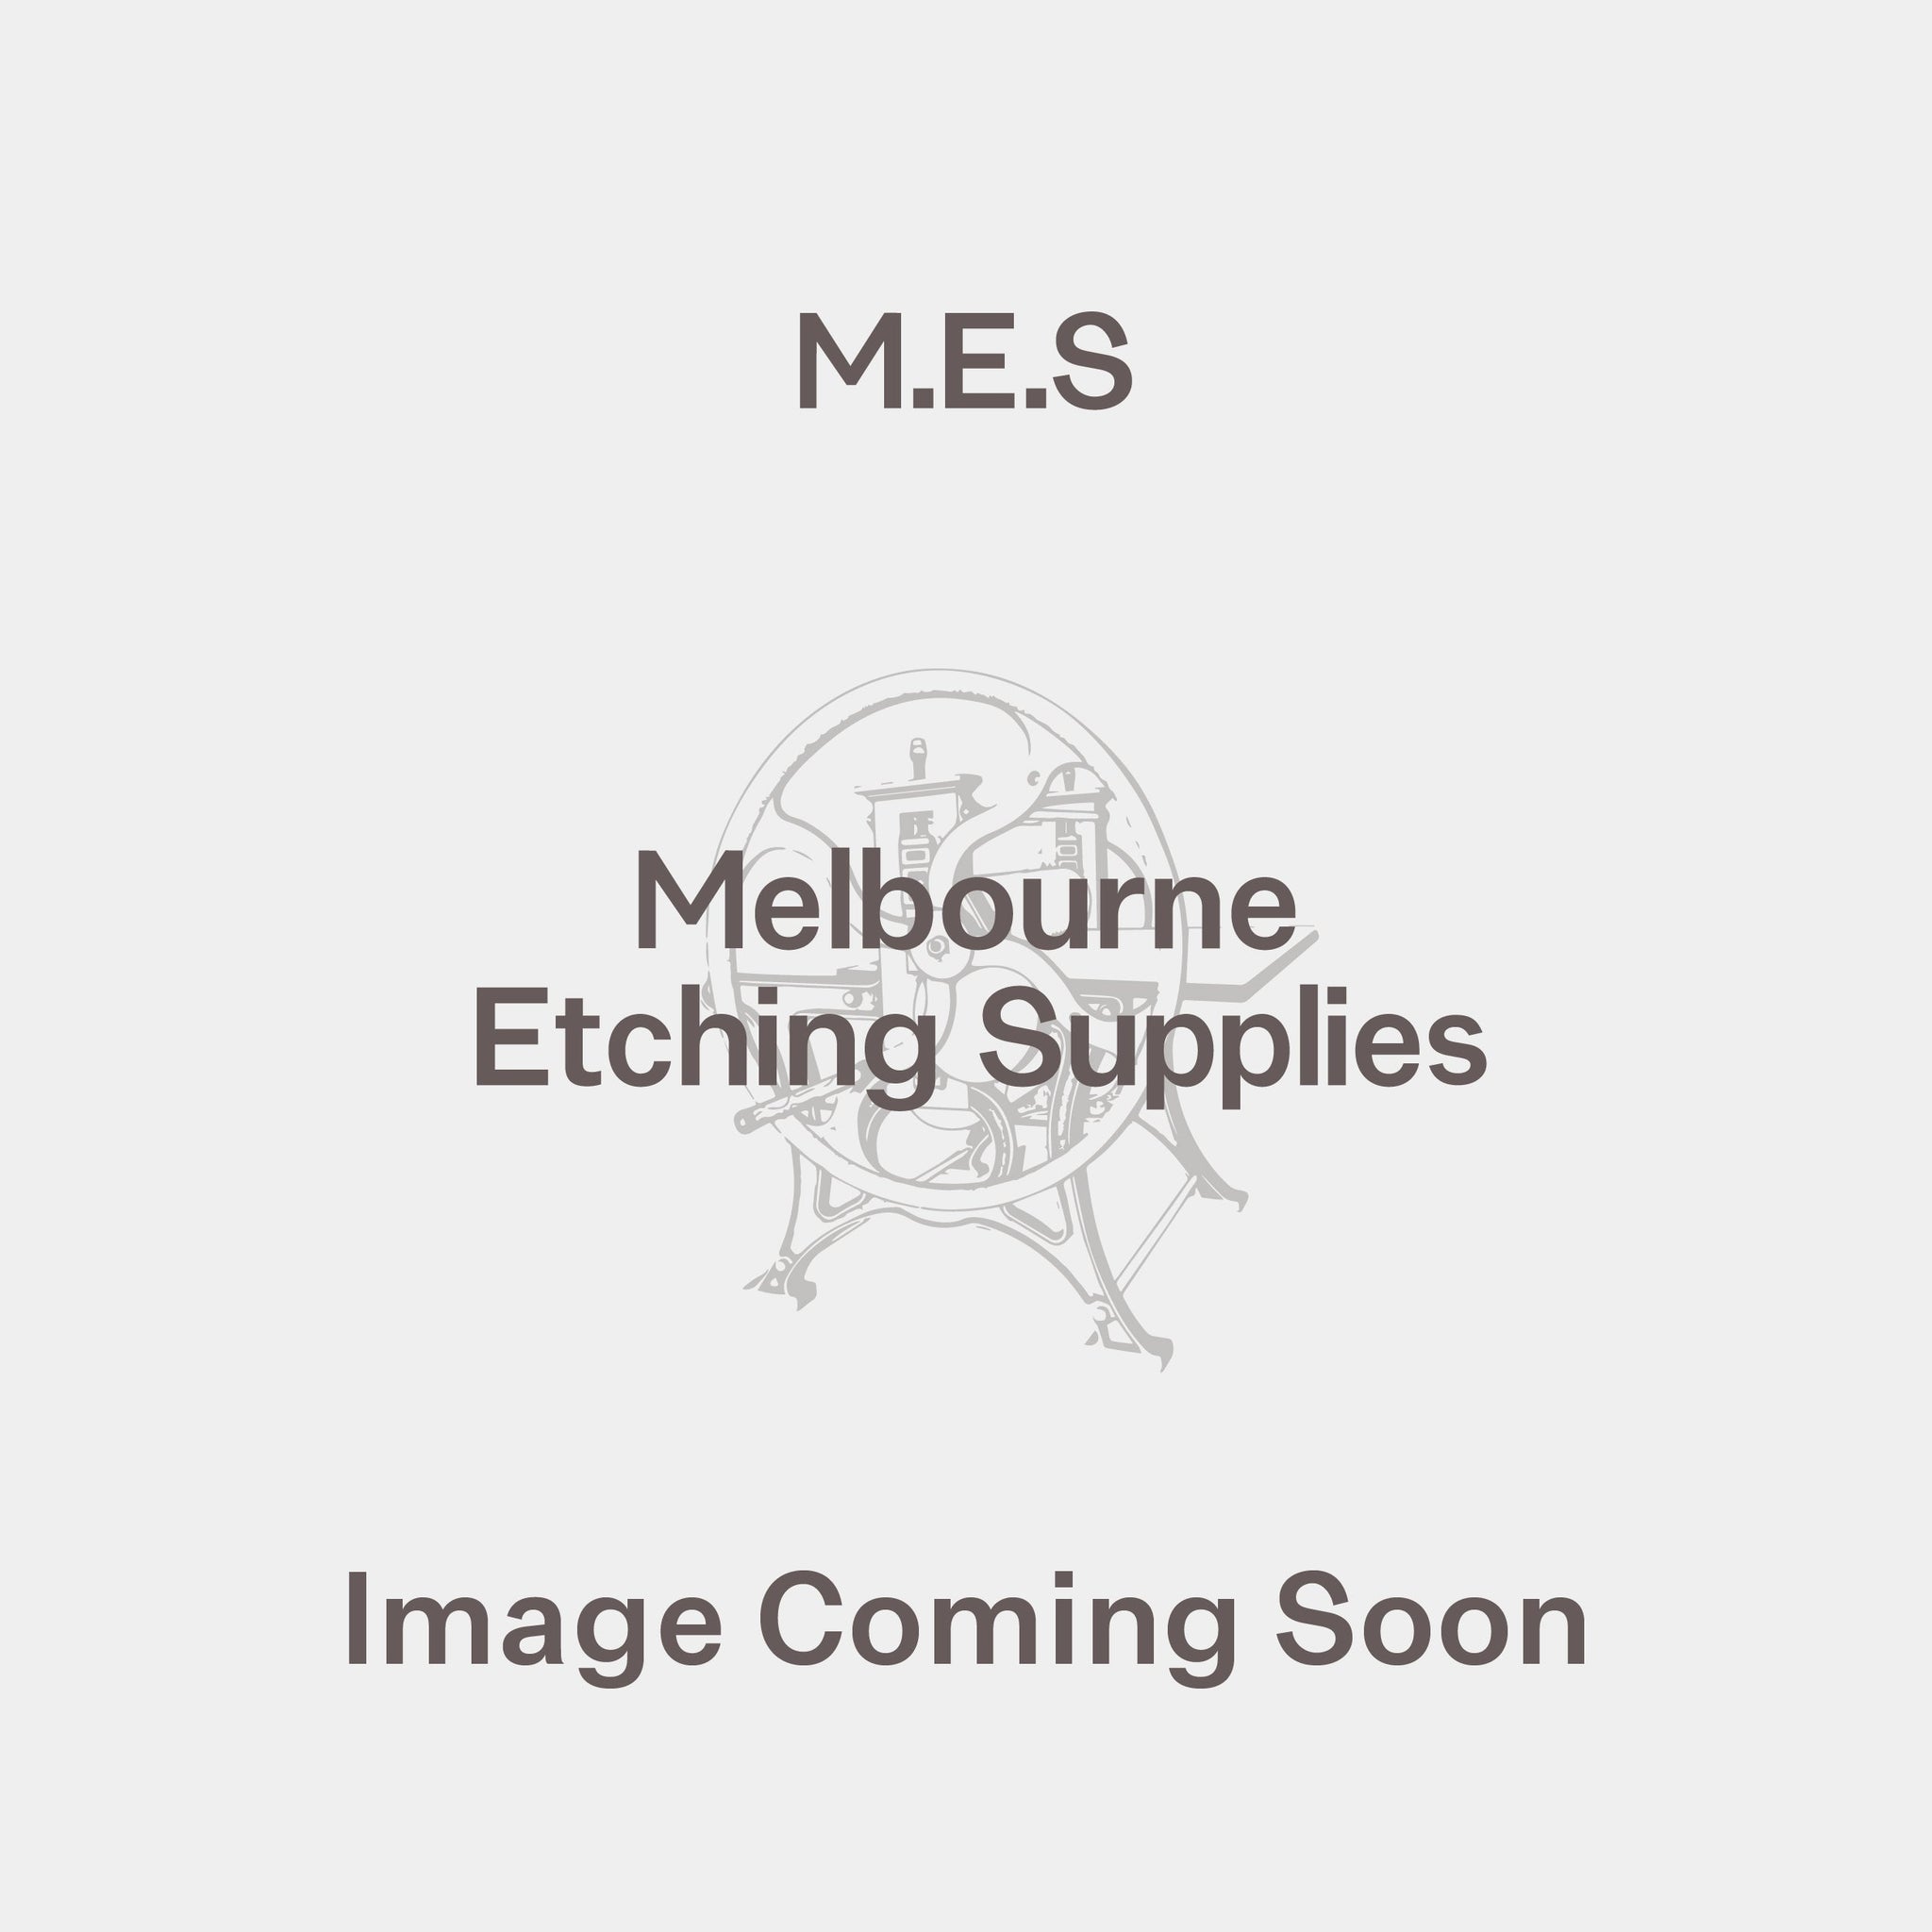 Tracing Roll 110/115gsm 90cmx20m - Melbourne Etching Supplies